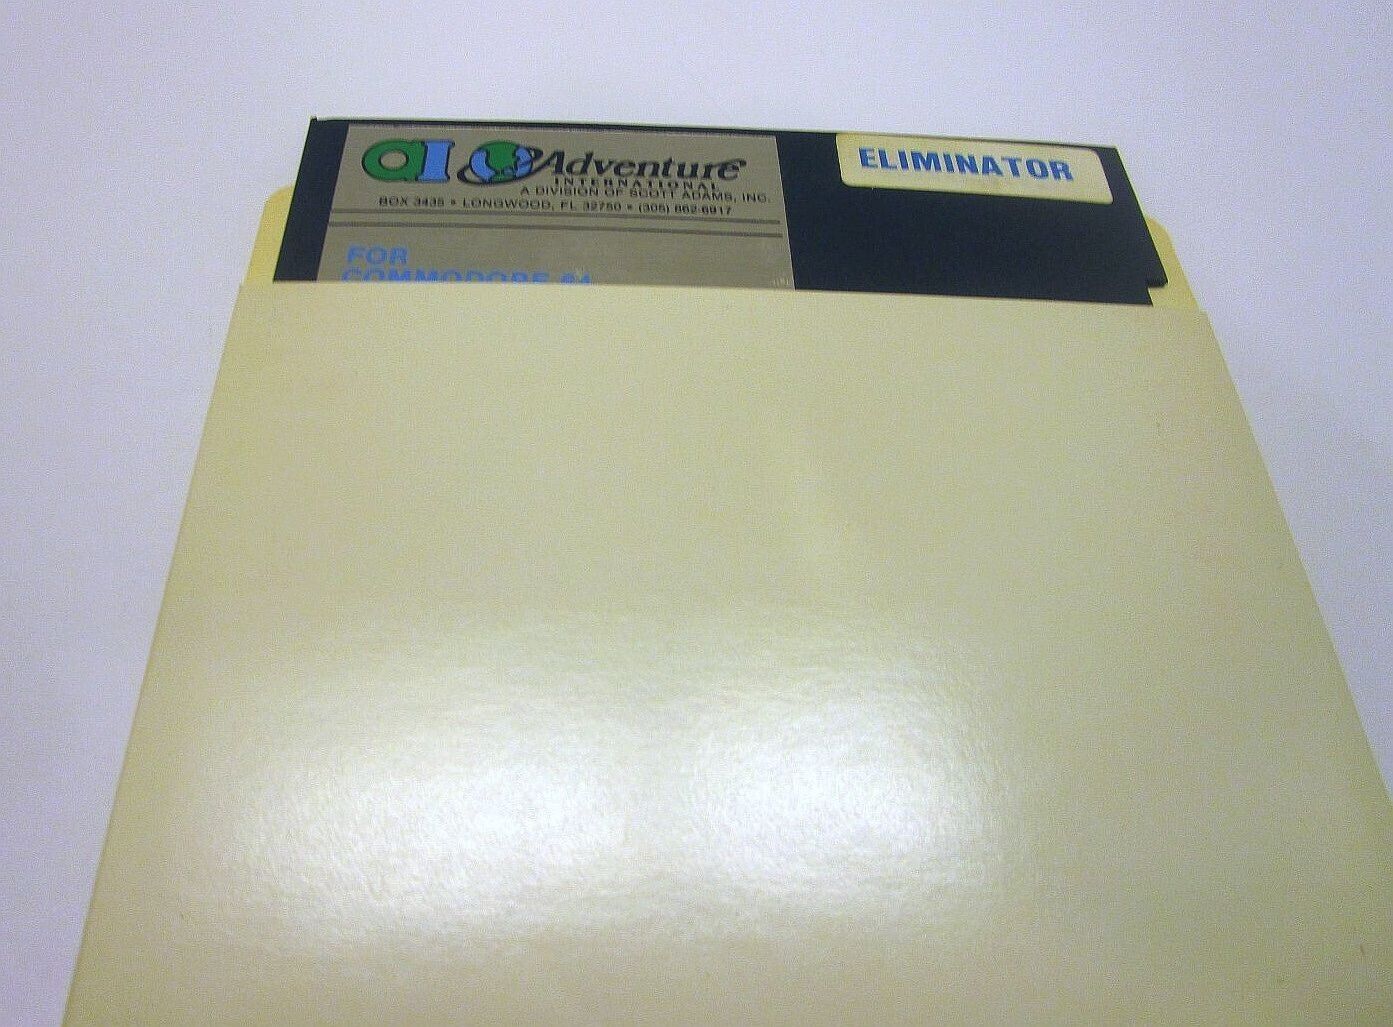 VERY RARE Eliminator Disk by Adventure International for Commodore 64/128